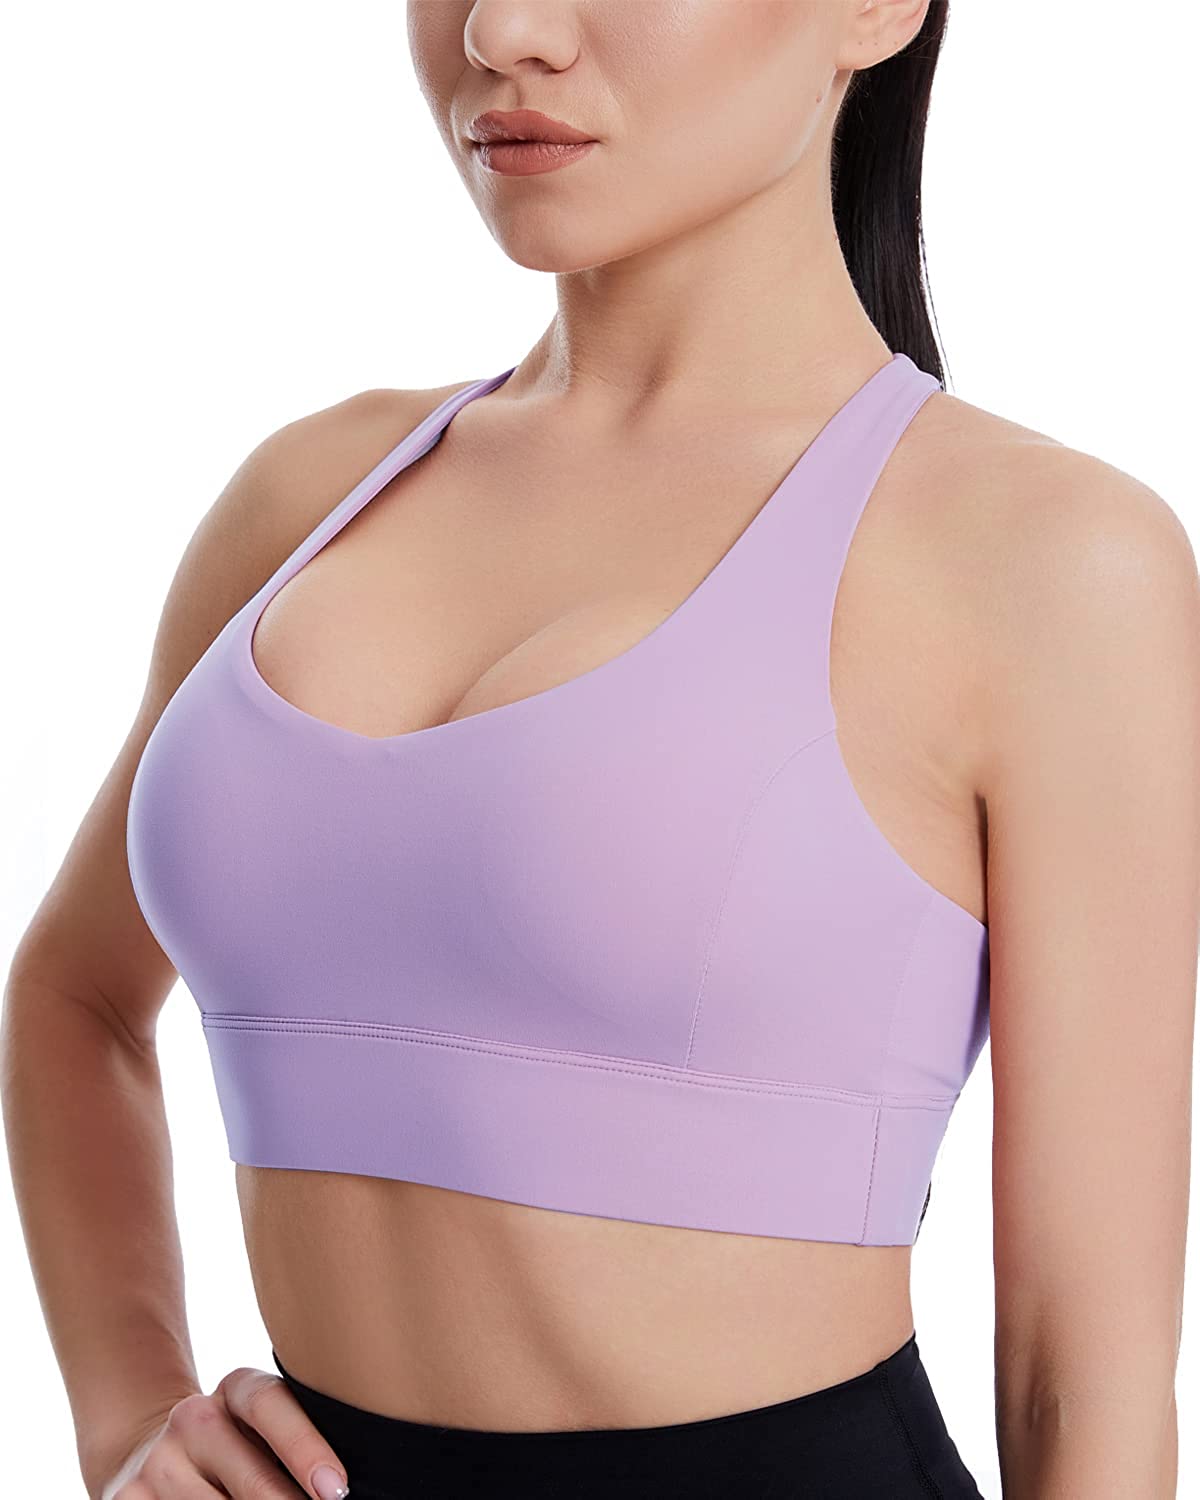 Grace Form Strappy Sports Bra for Women, Padded High Impact Push